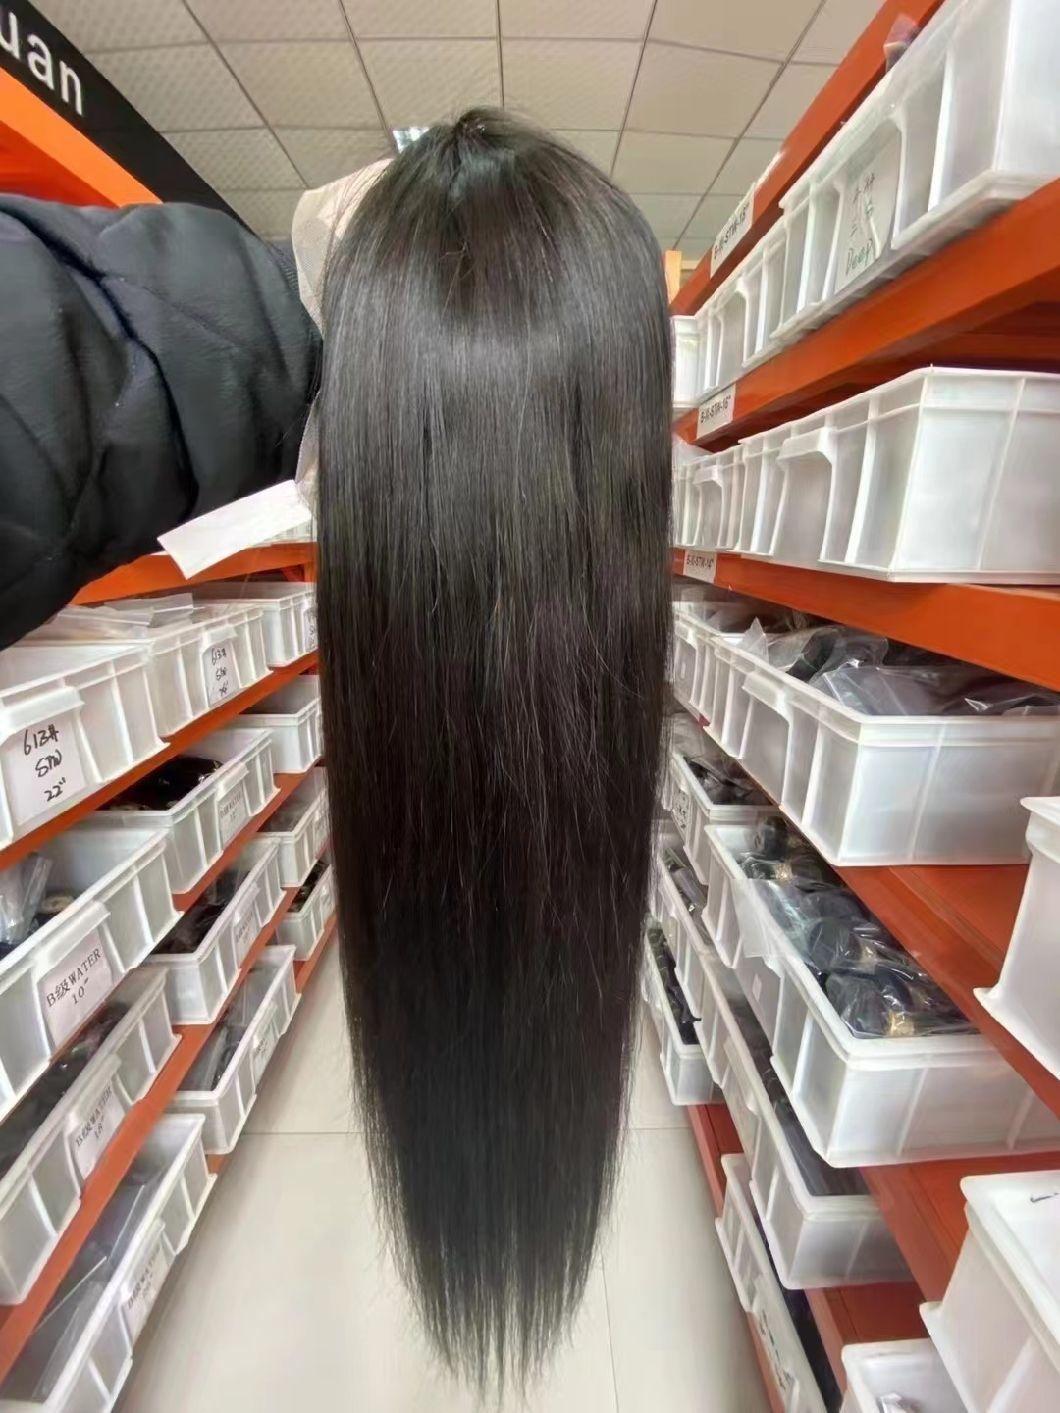 100% Human Hair Wig, Hair Bundles and Lace Frontal, Remy Hair, Human Hair with 13*4, 4*4, 13*6, 360 Transparent Lace, 10-30 Inches, 130%, 150%, 180% Density